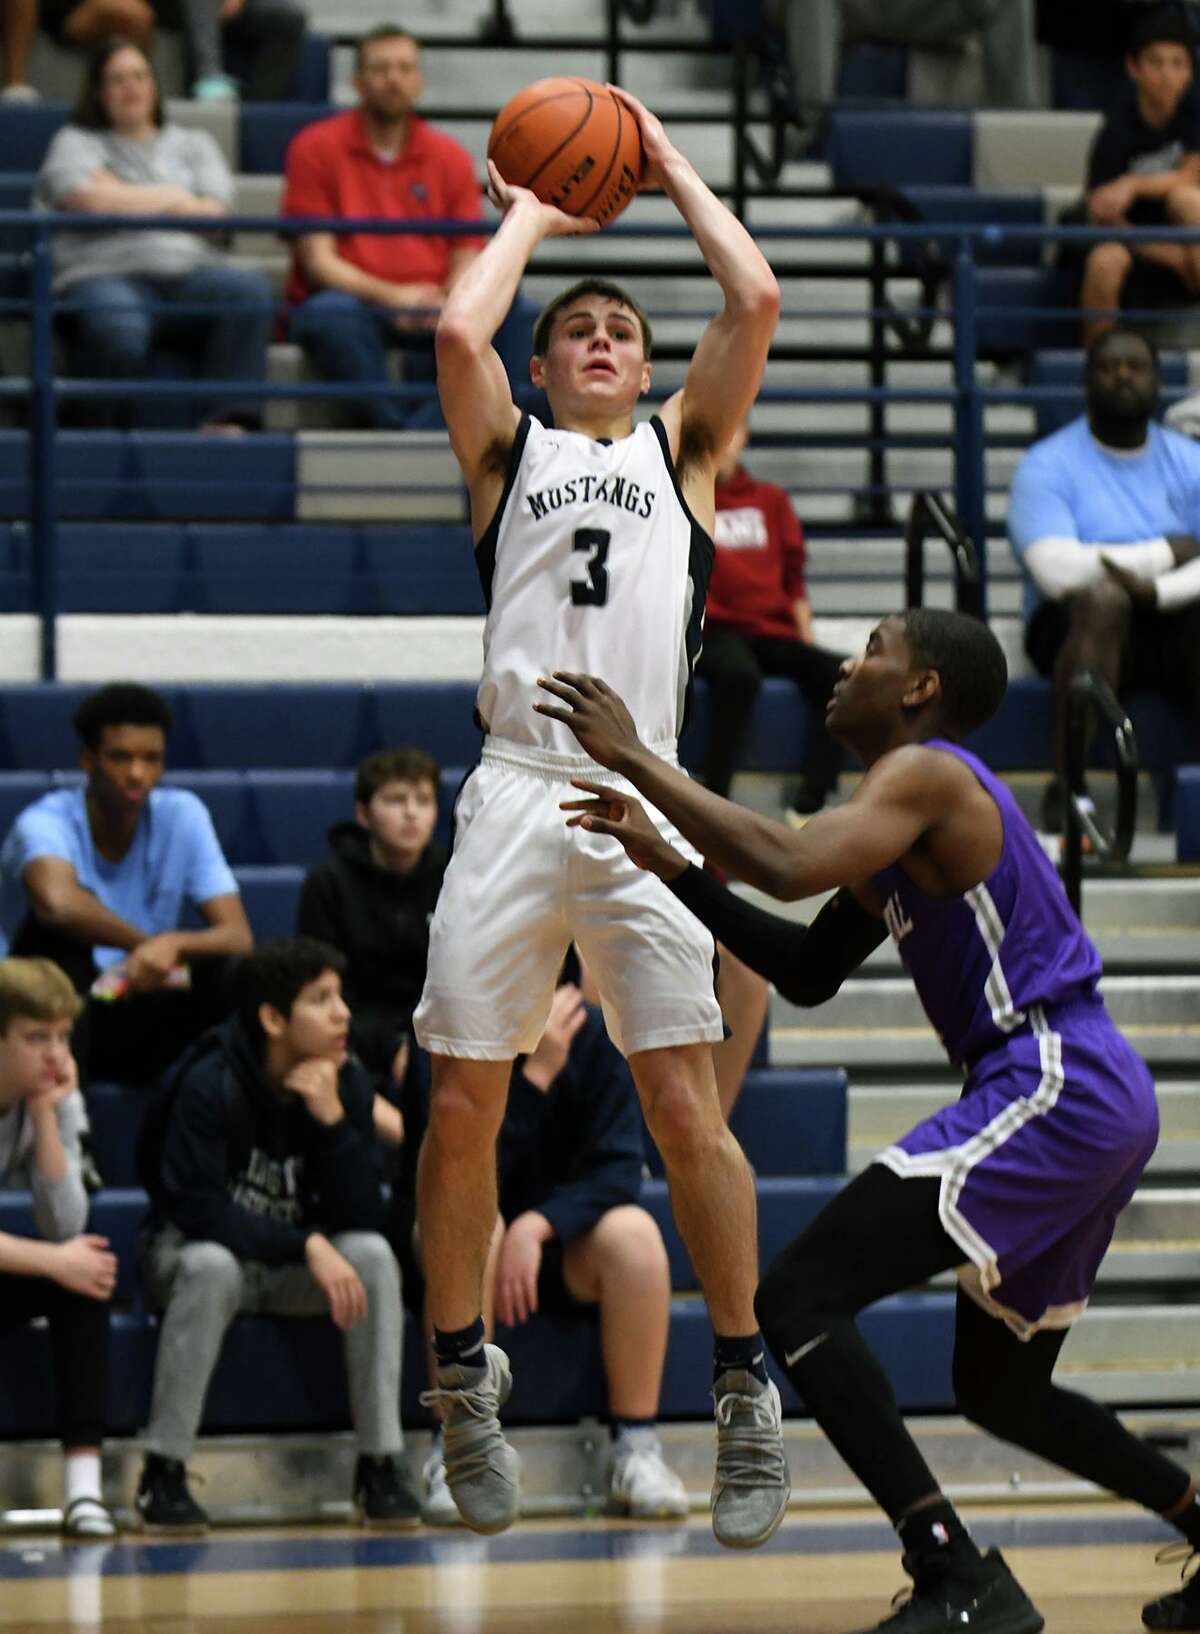 Kingwood sophomore Billy Gould (3) goes up for a three point shot over a Humble defender during the 2nd quarter of their District 22-6A matchup at KHS on Jan. 2, 2019.